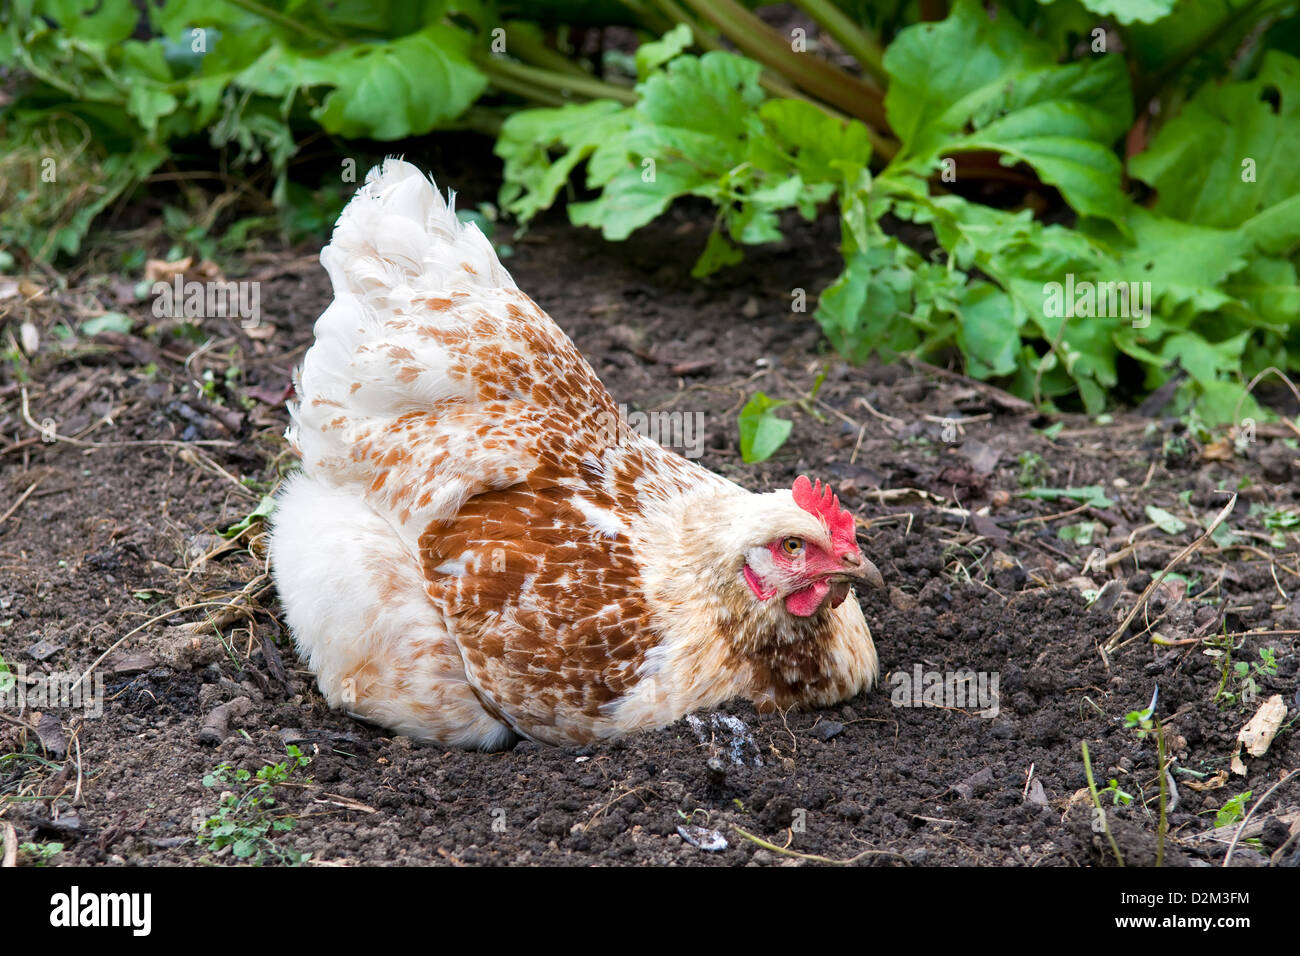 Picture of a brown amber pullet, or chicken sitting in dirt about to have a mud bath with rhubarb plants behind Stock Photo